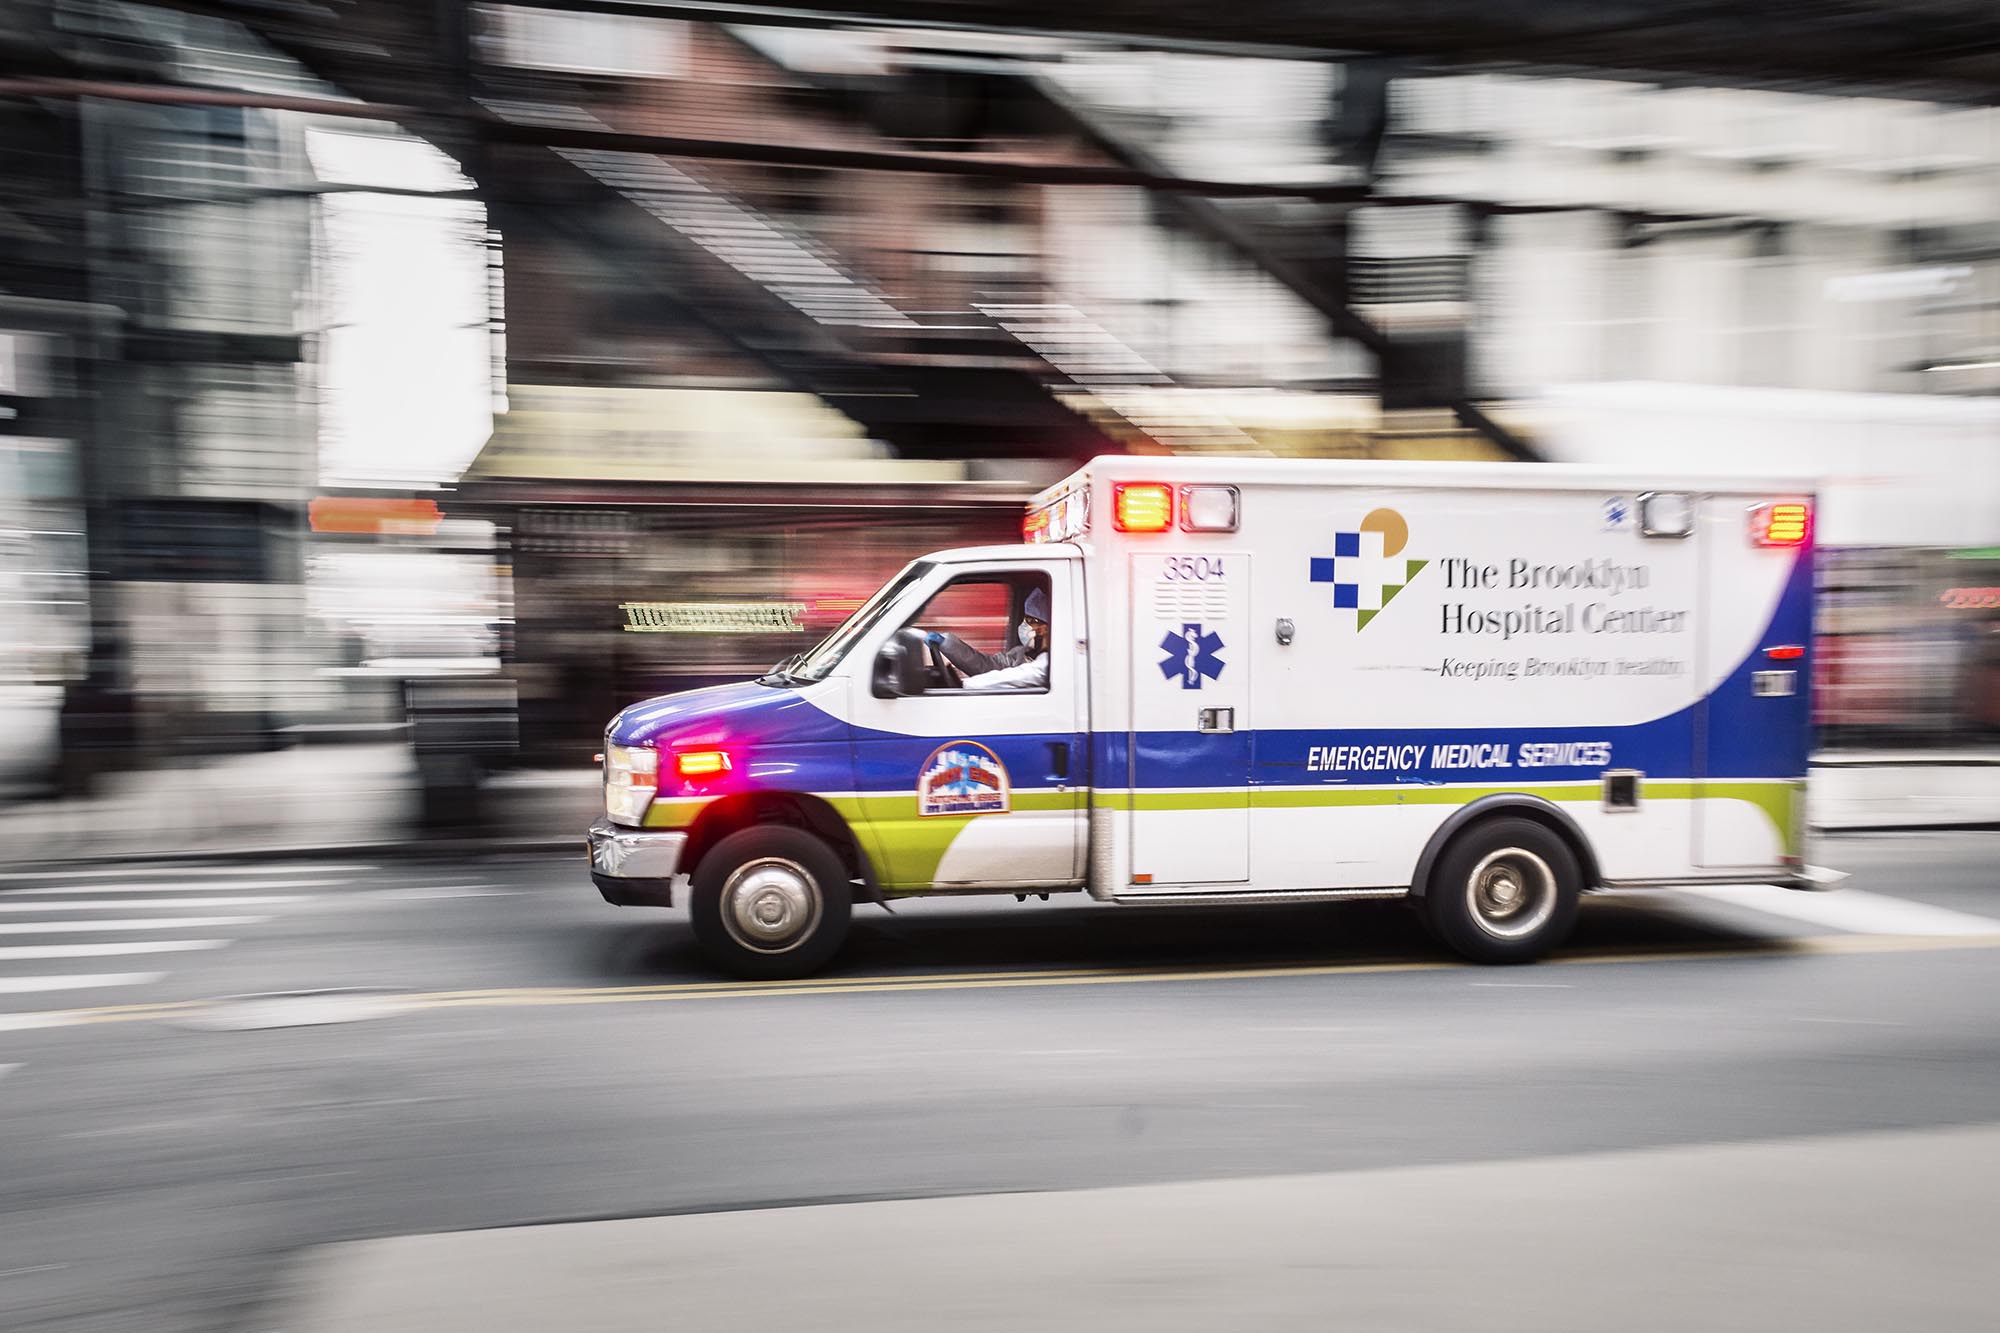 Blurred image of The Brooklyn Hospital Ambulance with lights on going down the road